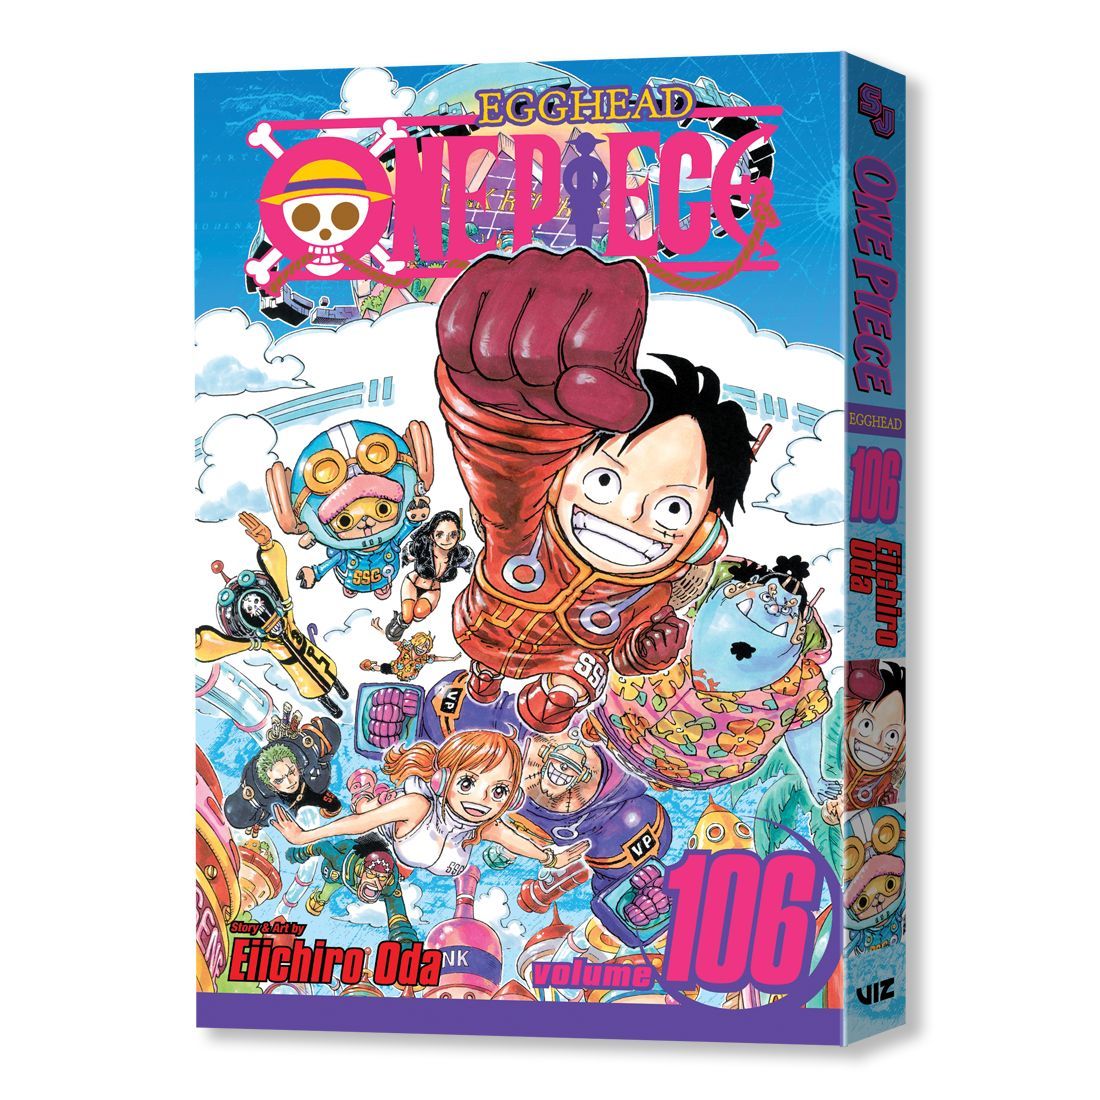 VIZ on X: Cover reveal! ☠️ One Piece, Vol. 100 releases August 2, 2022  Pre-order now:   / X